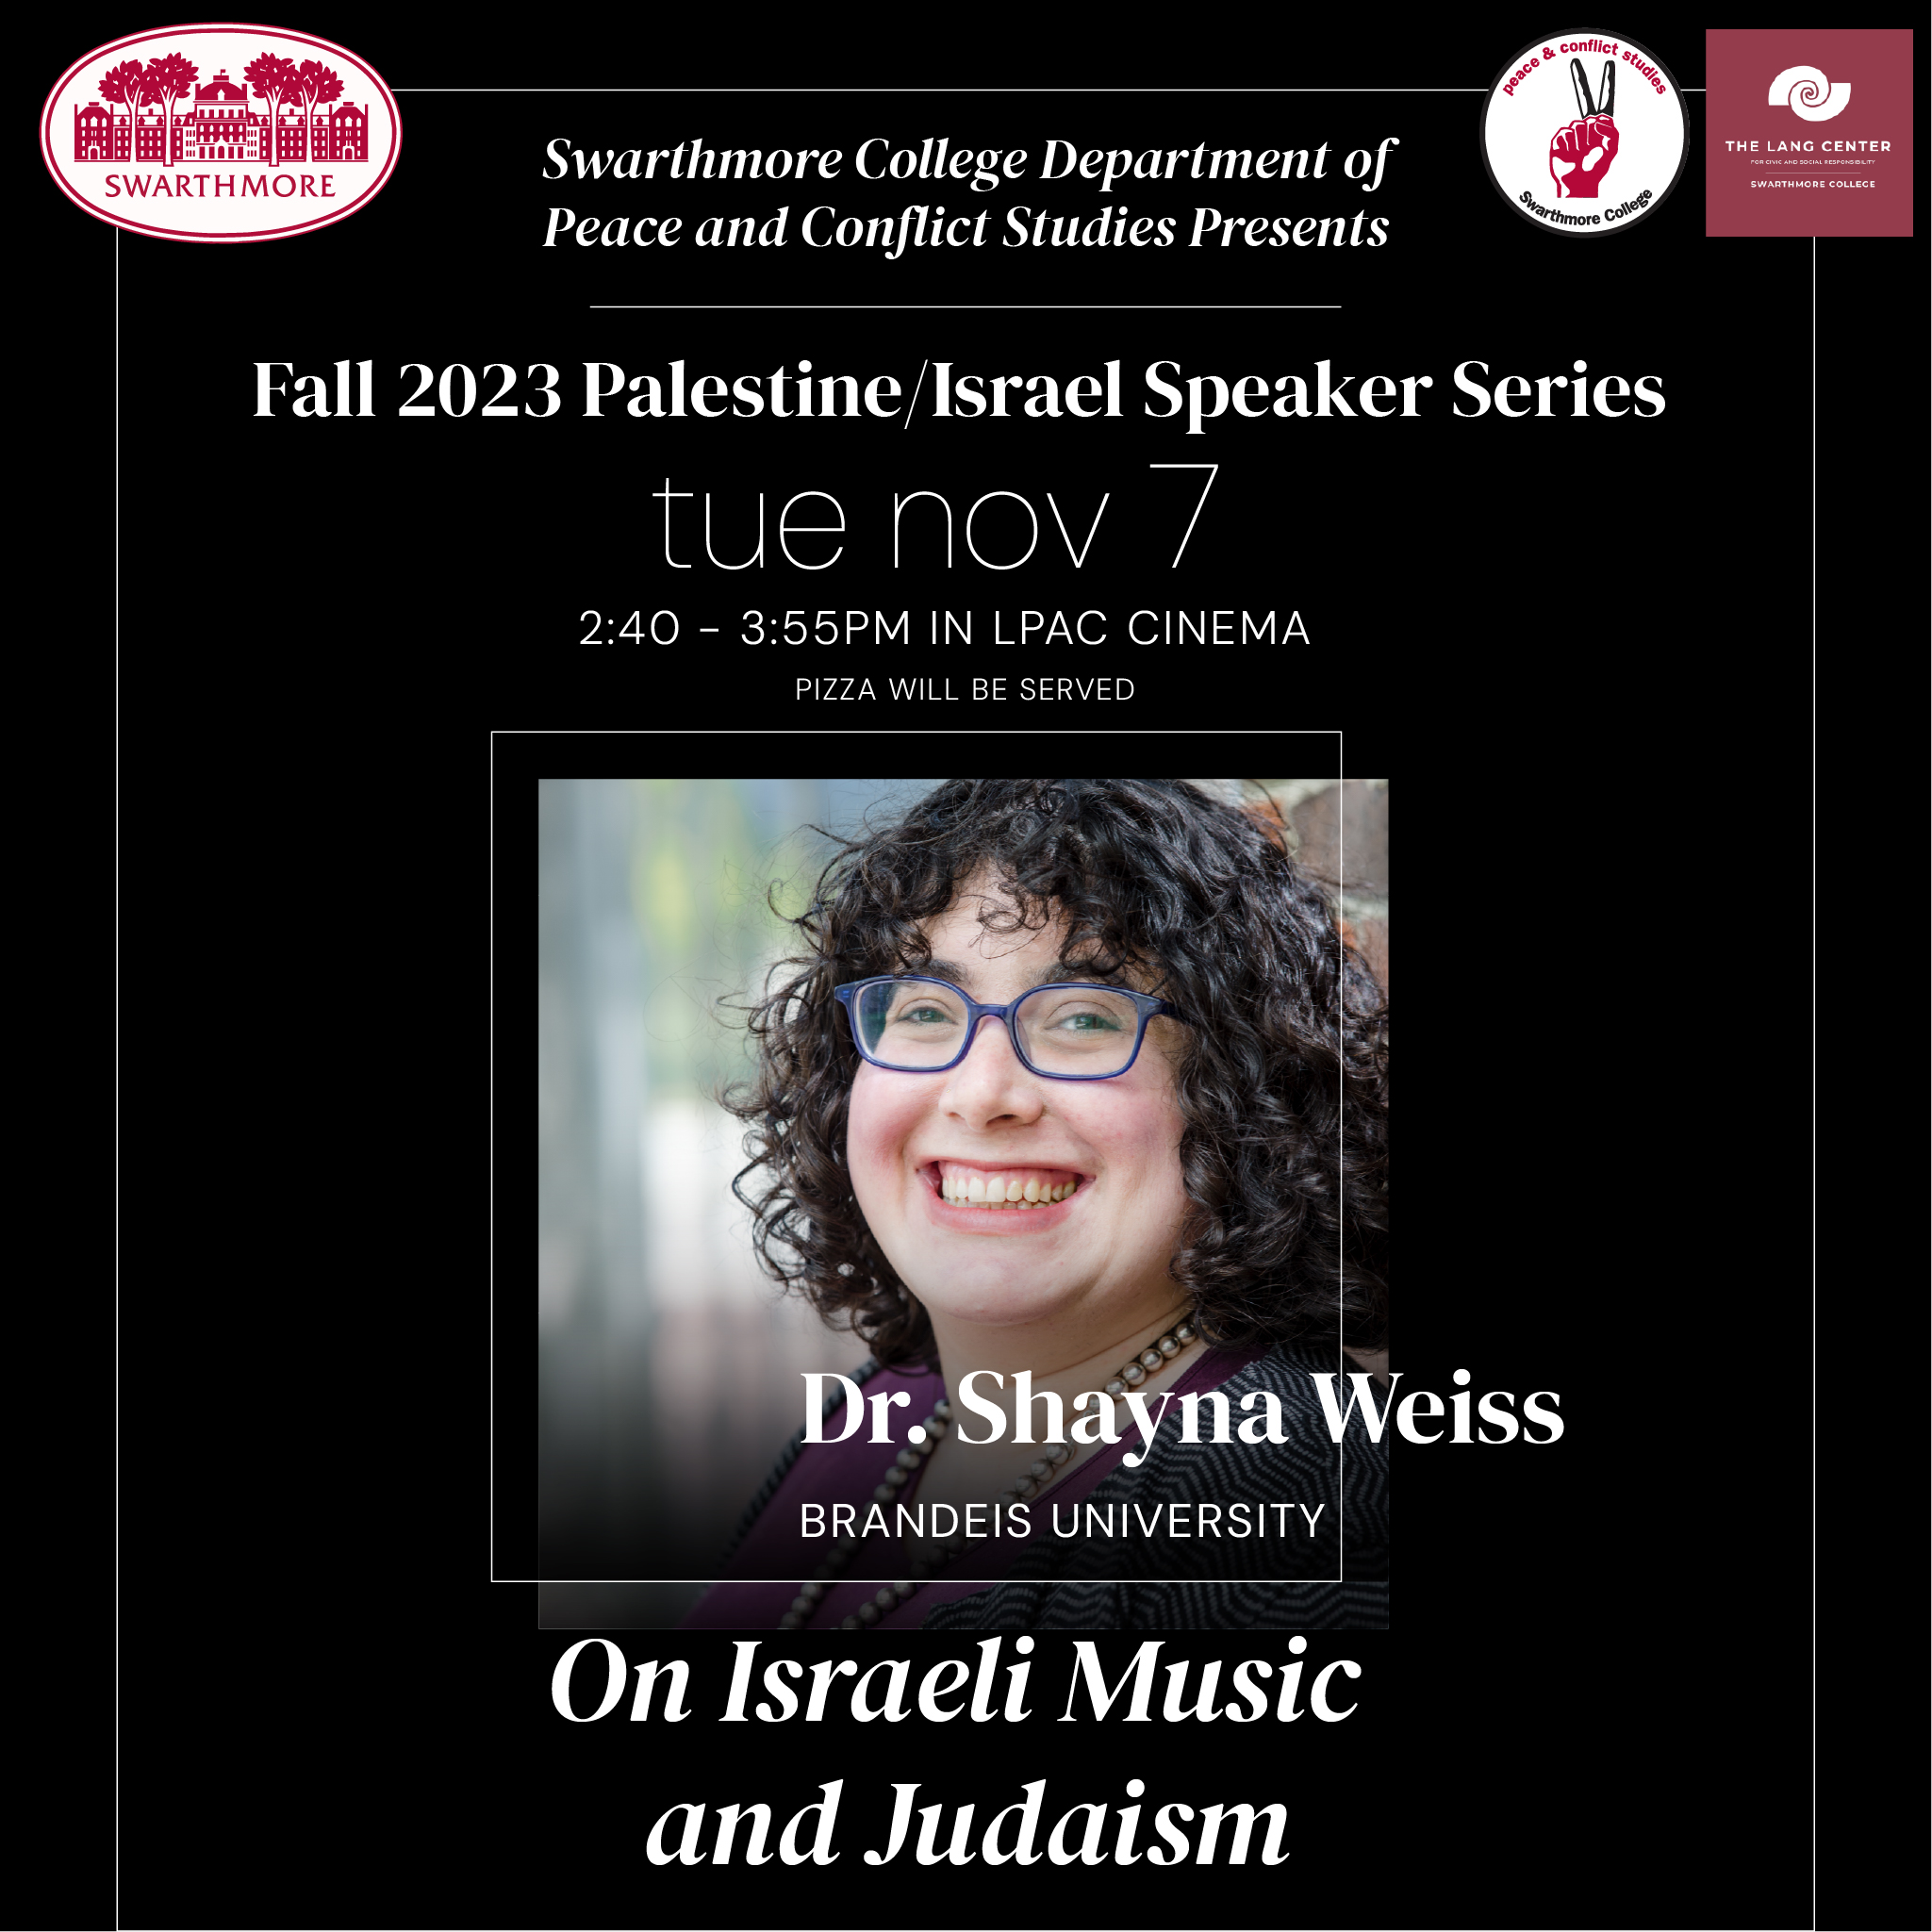 Dr. Shayna Weiss on Israeli Music and Judaism